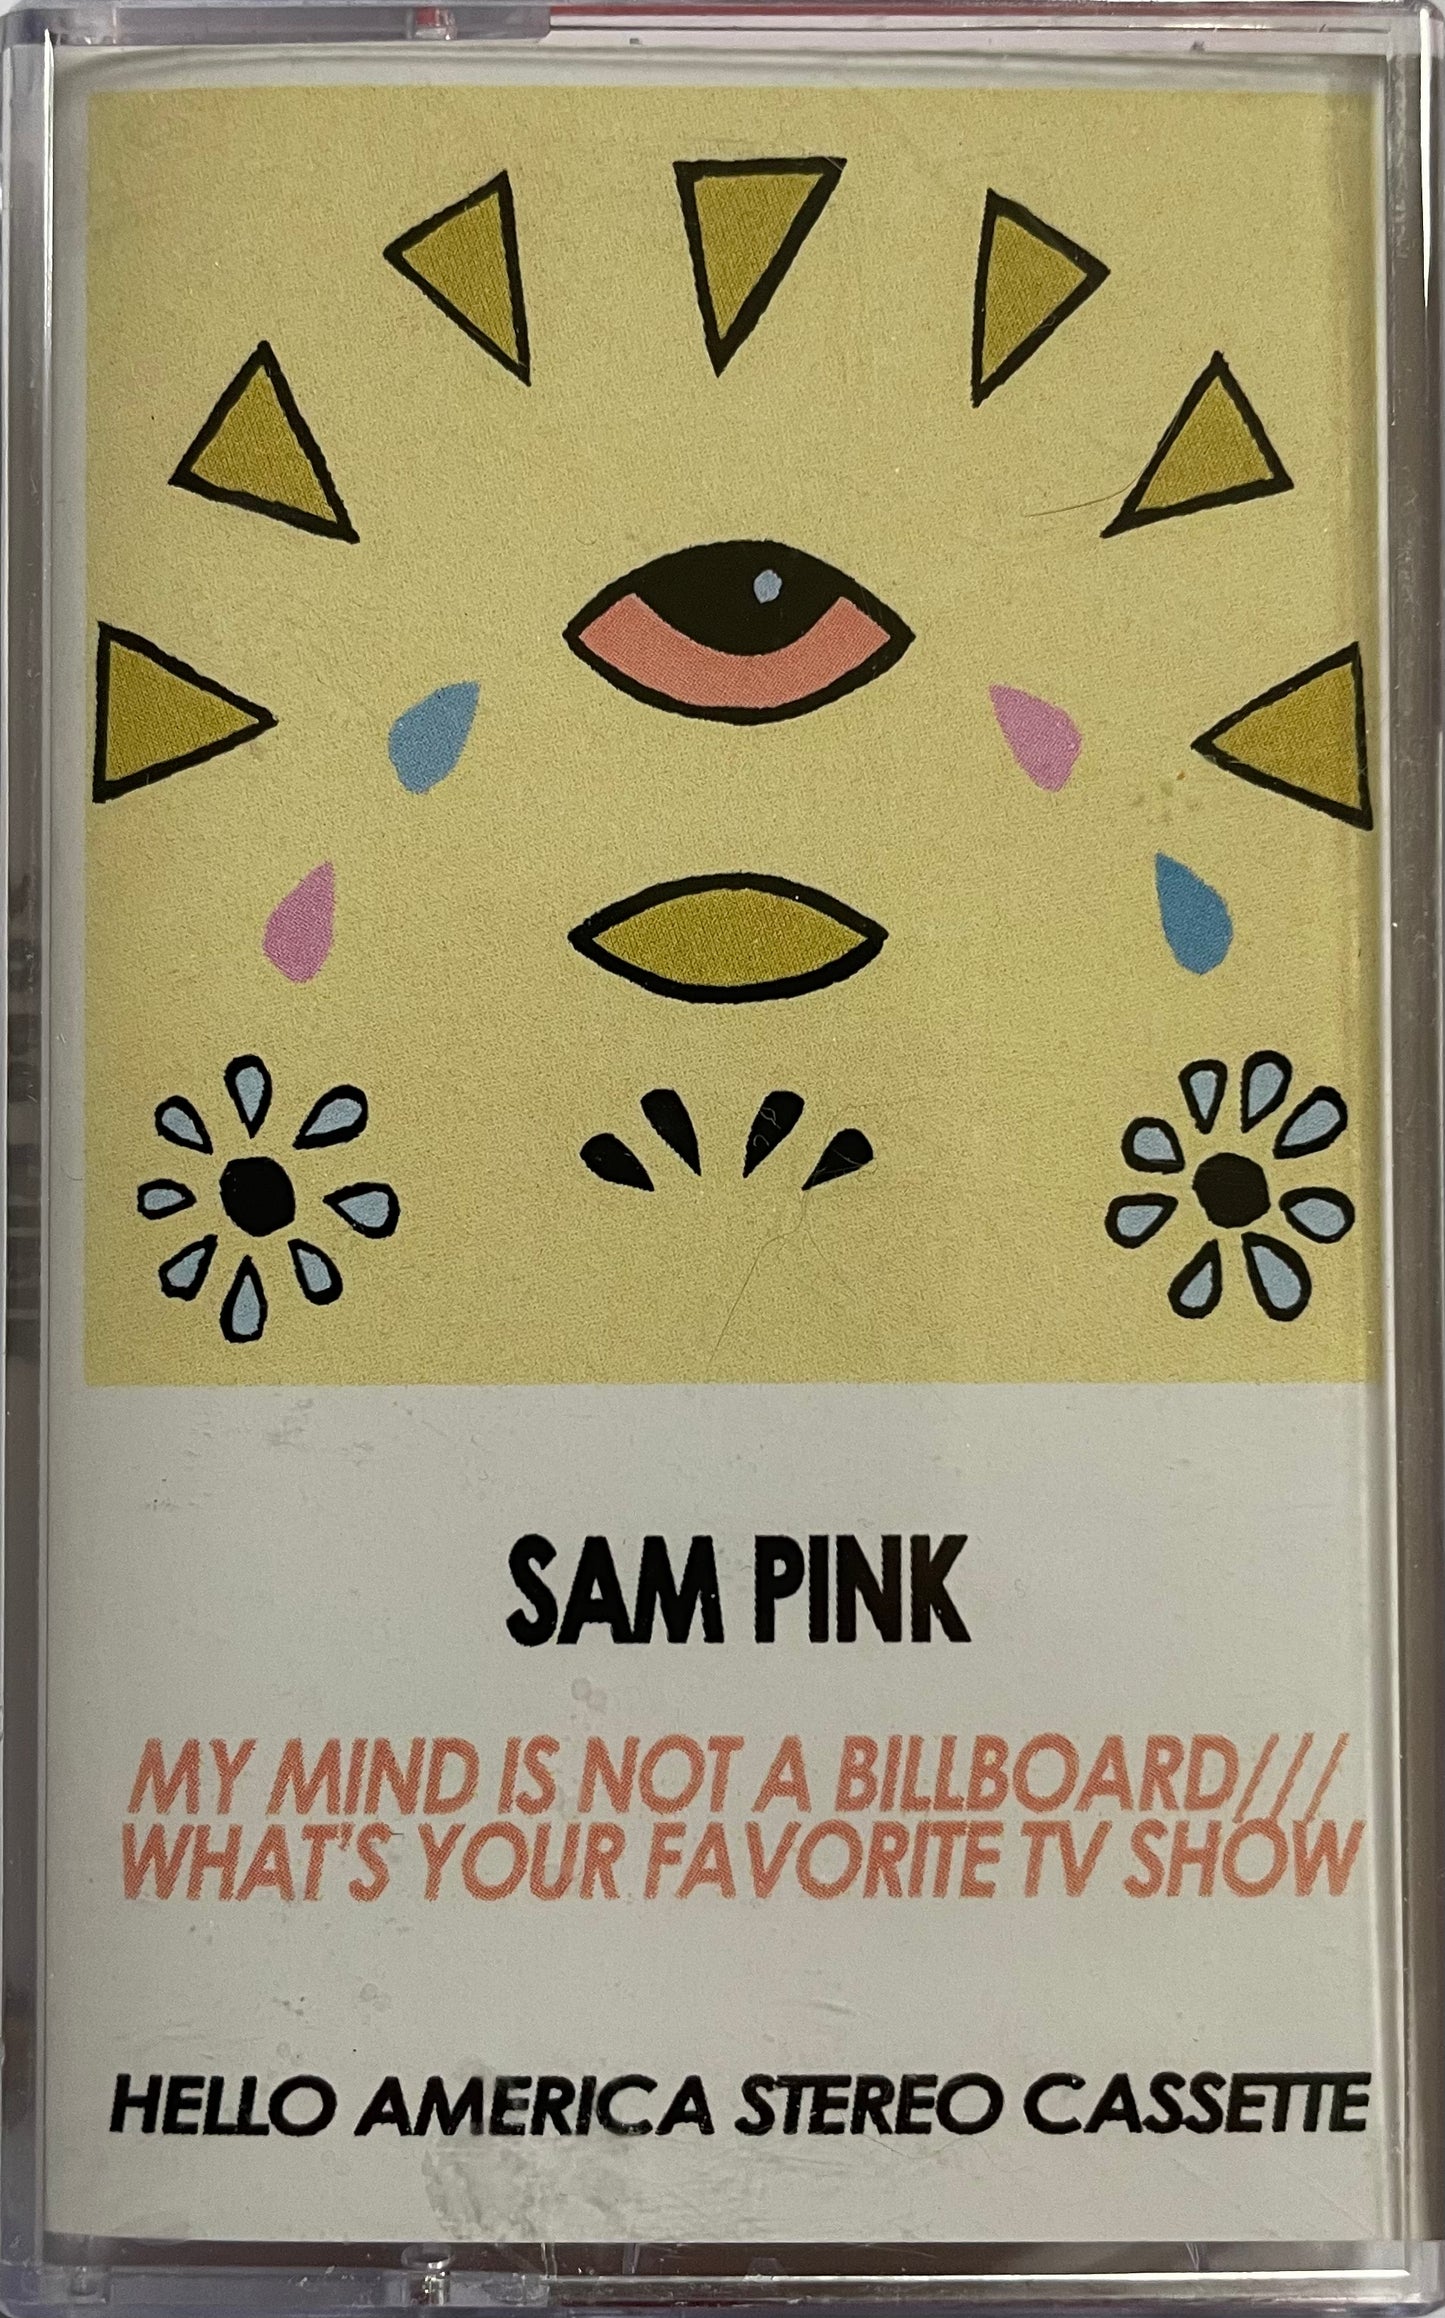 My Mind is not a Billboard /// What's Your Favorite TV Show, by Sam Pink